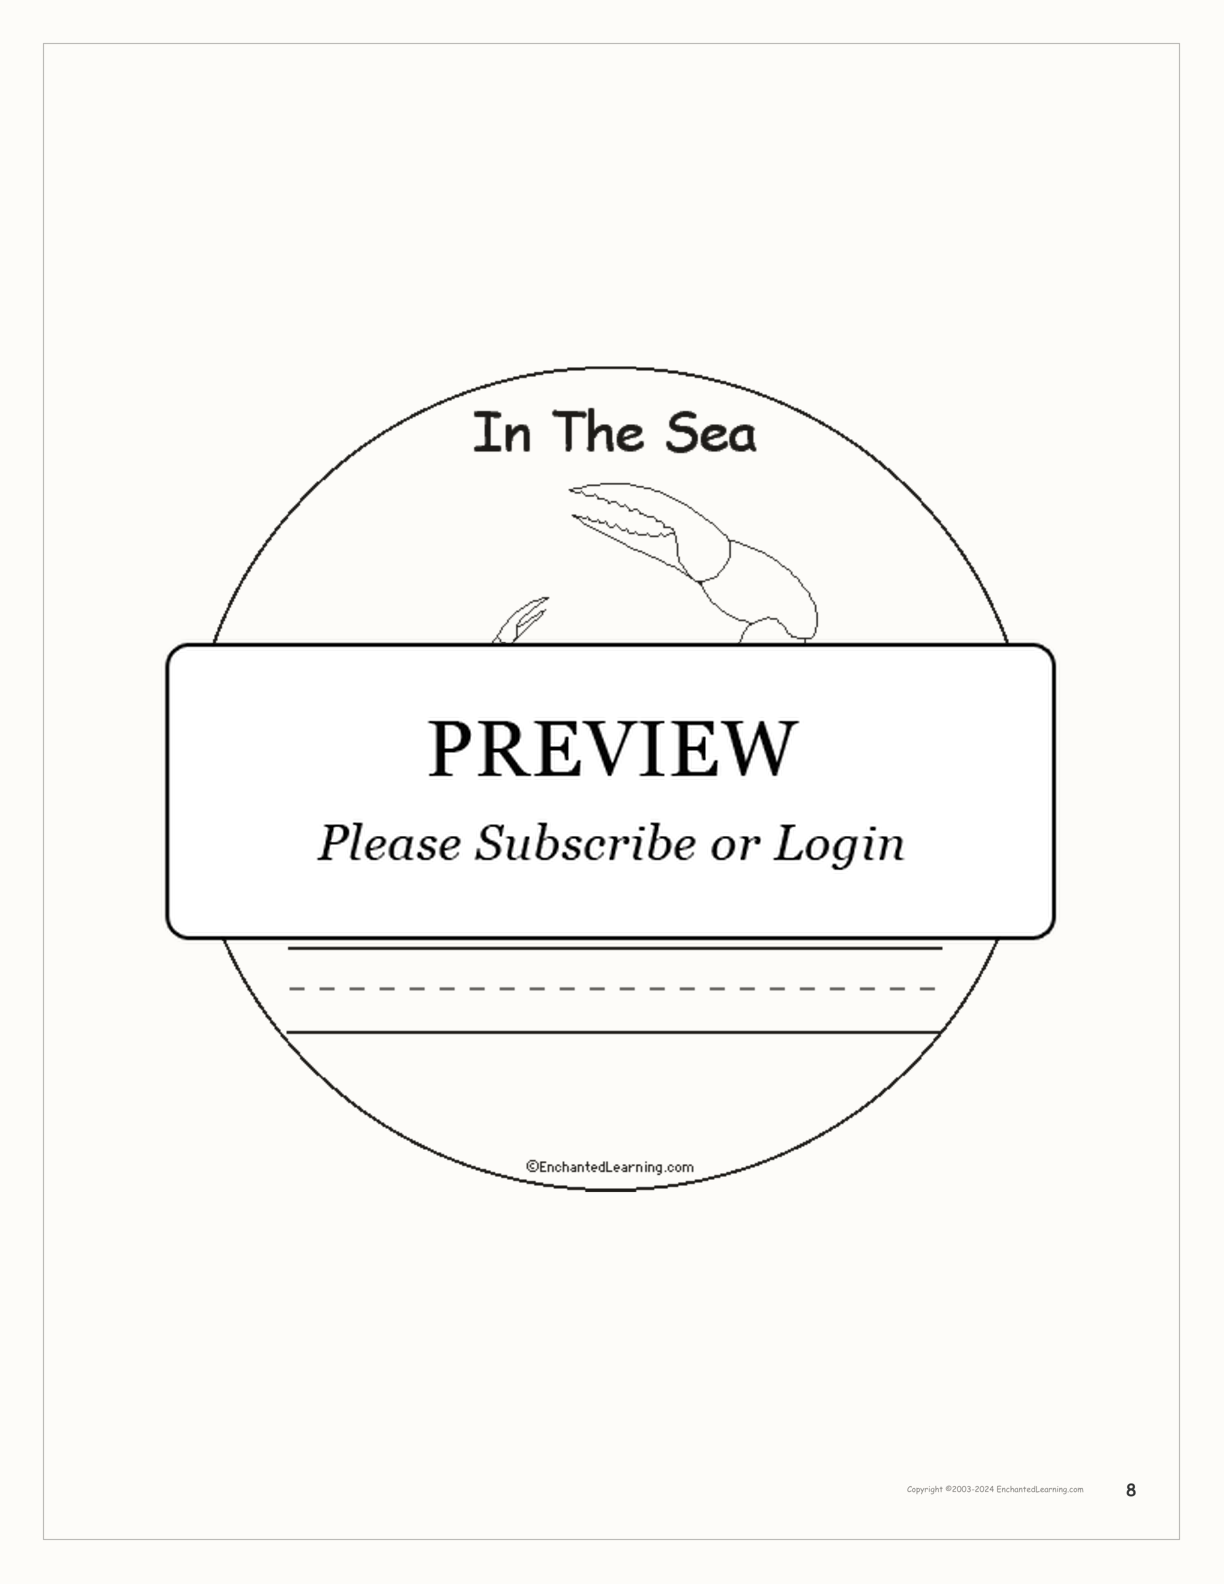 In The Sea: Early Reader Book interactive printout page 8